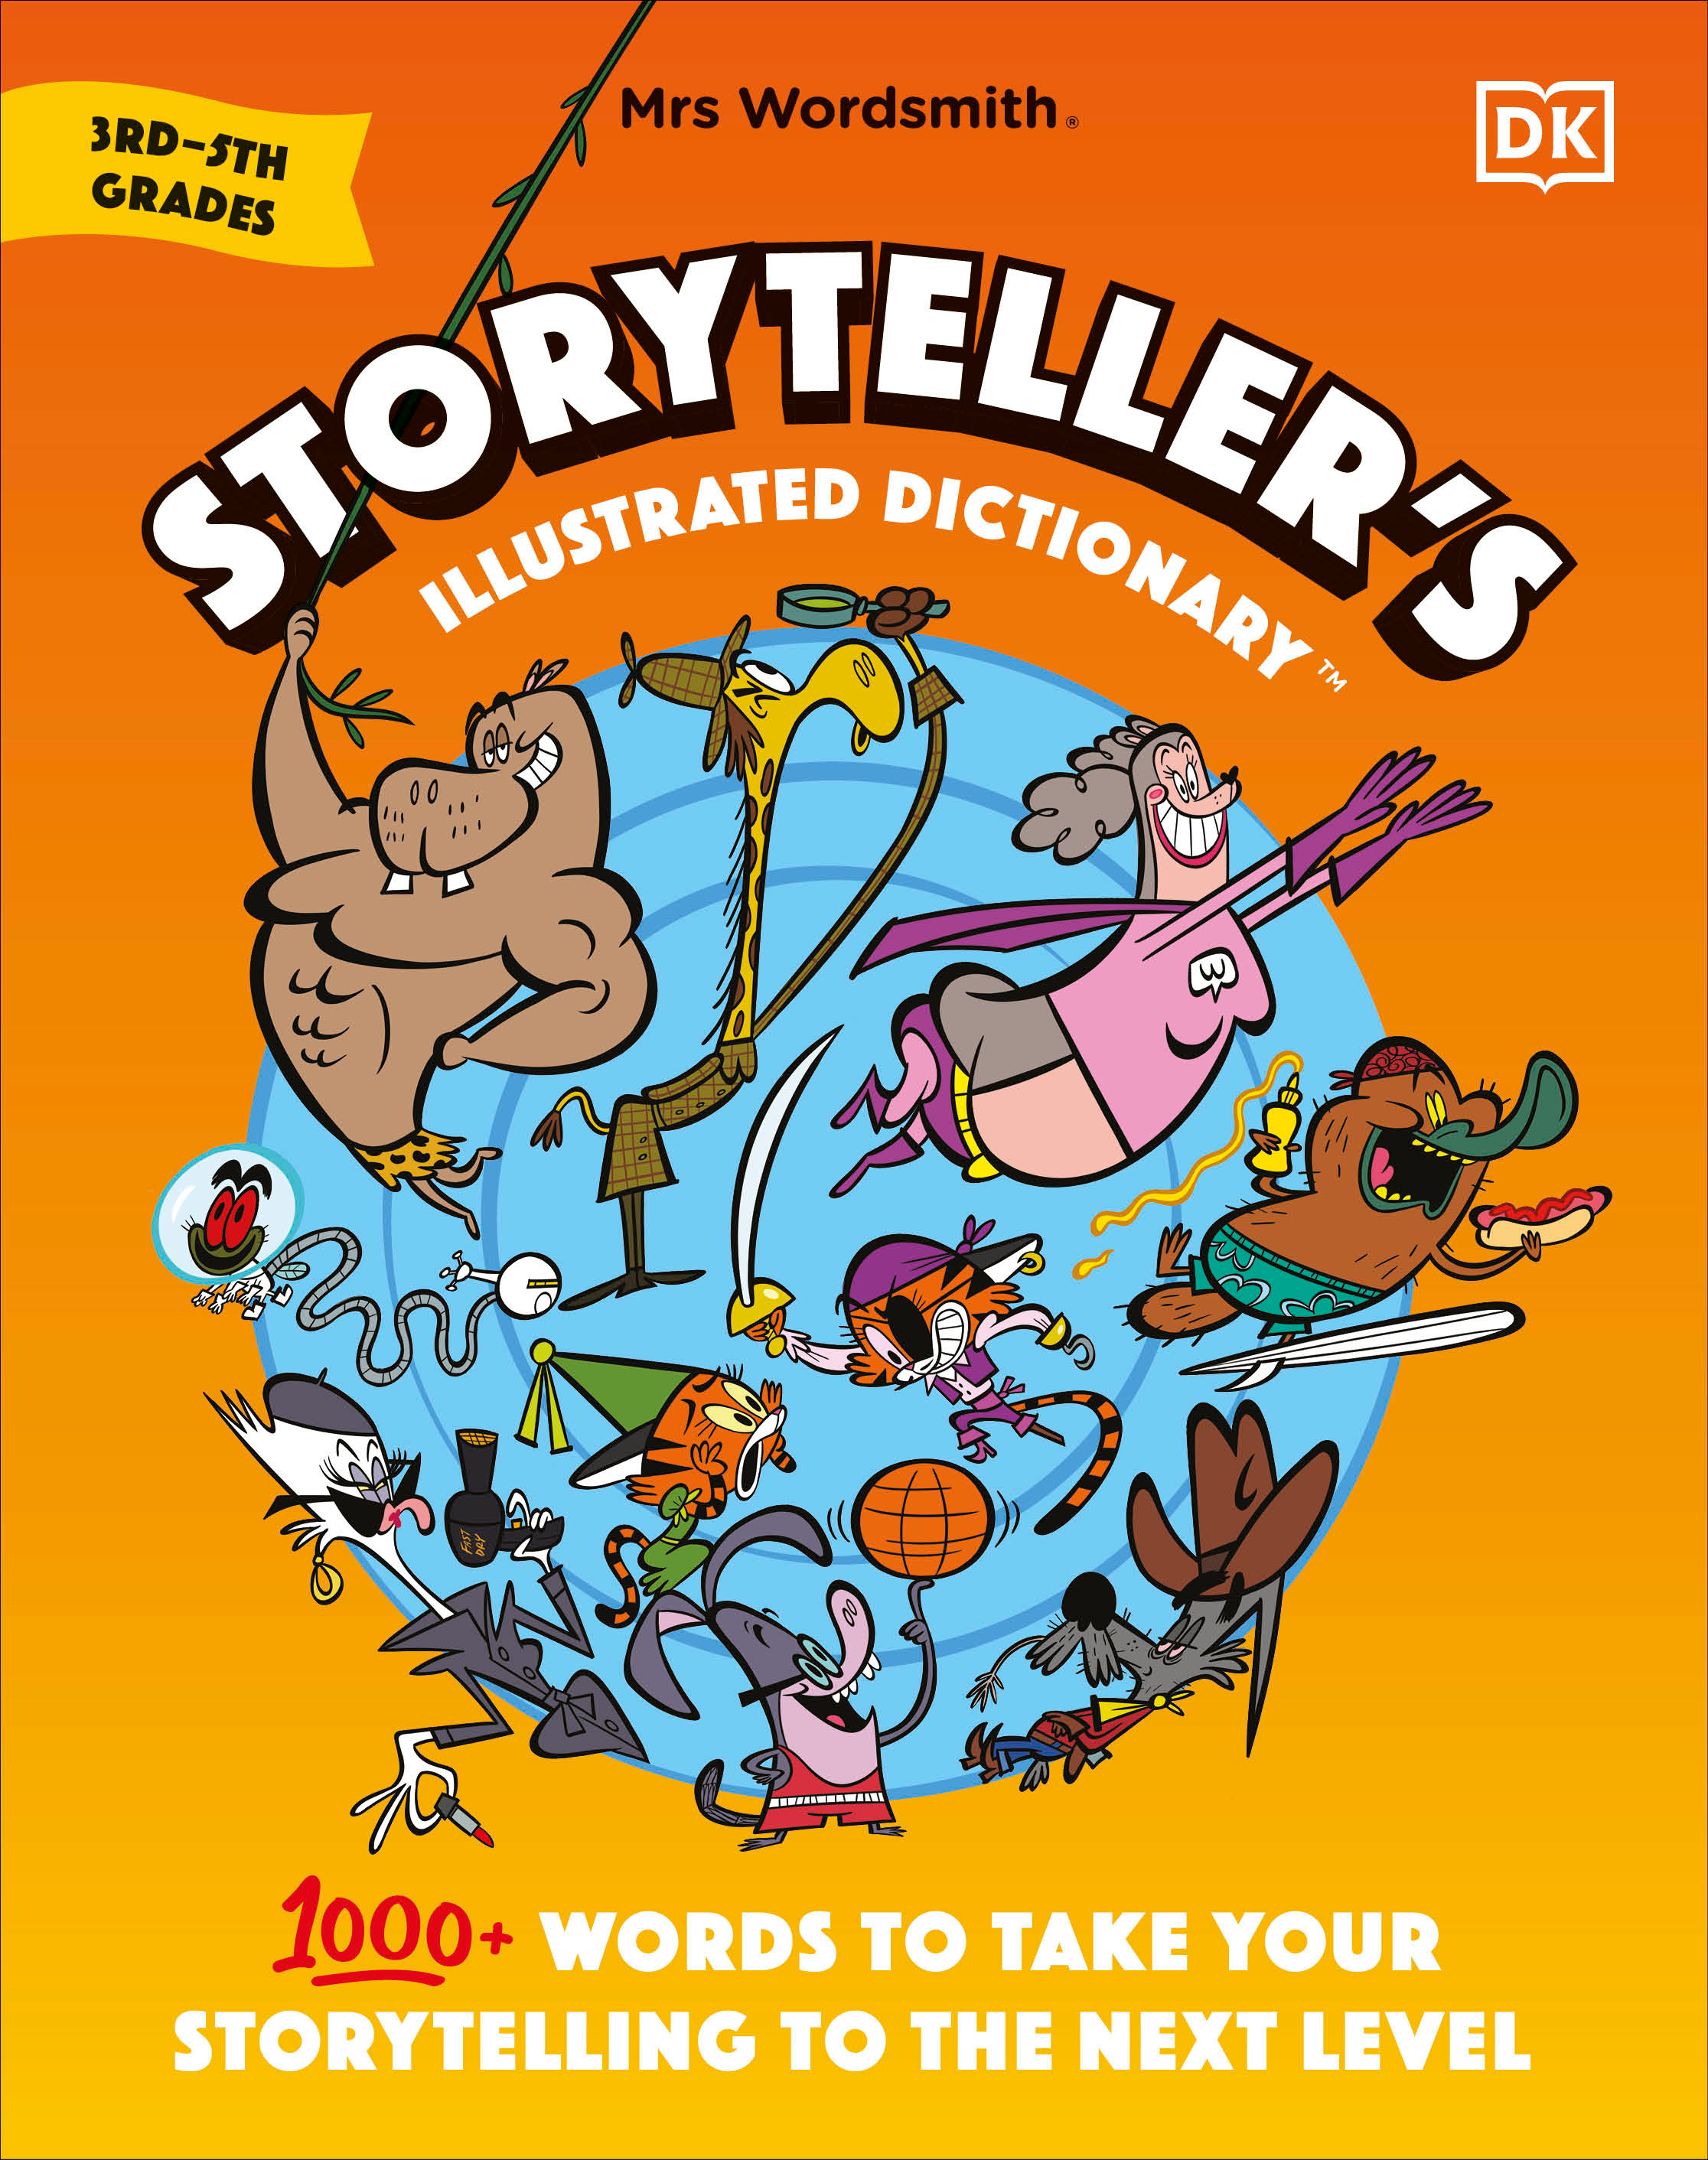 Mrs Wordsmith Storytellerâ€™s Illustrated Dictionary 3rd-5th Grades : 1000+ Words to Take Your Storytelling to the Next Level | Documentary